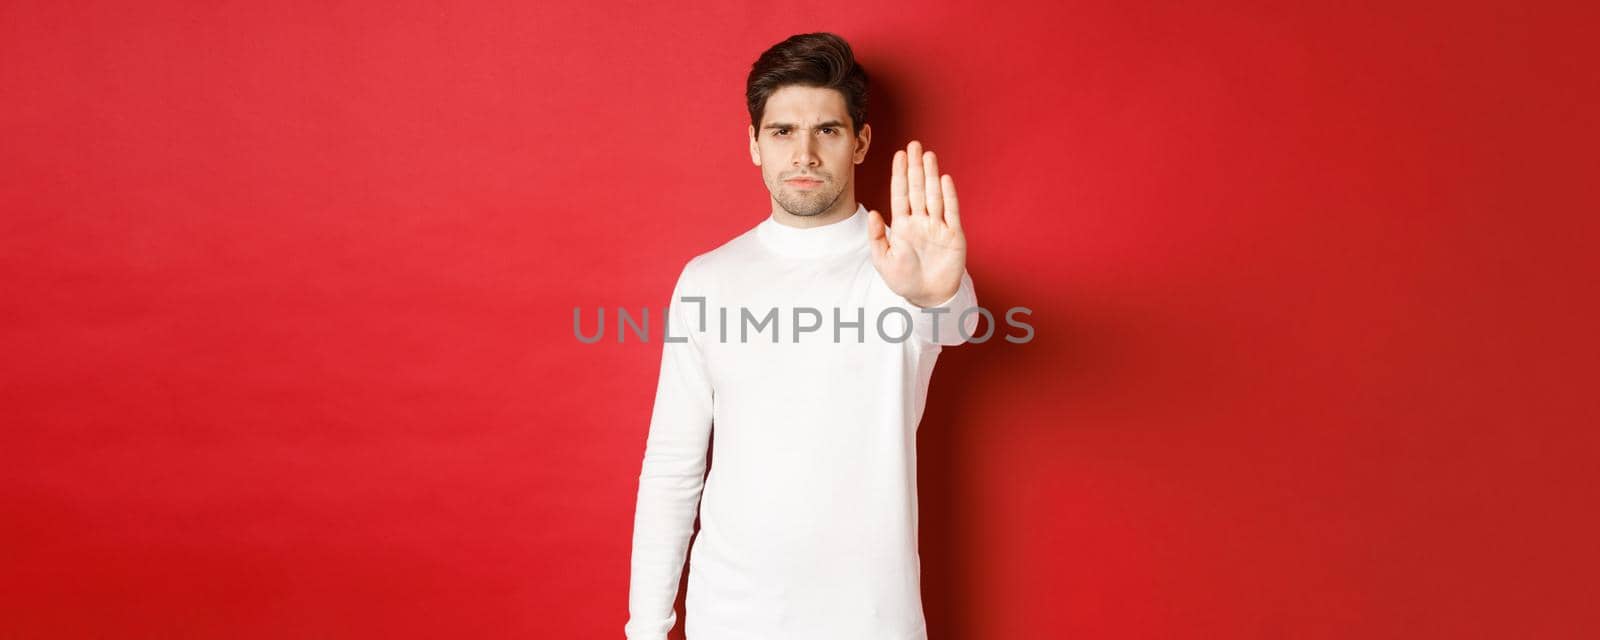 Image of serious and confident man telling to stop, forbid something, extending one hand and prohibit action, standing over red background.